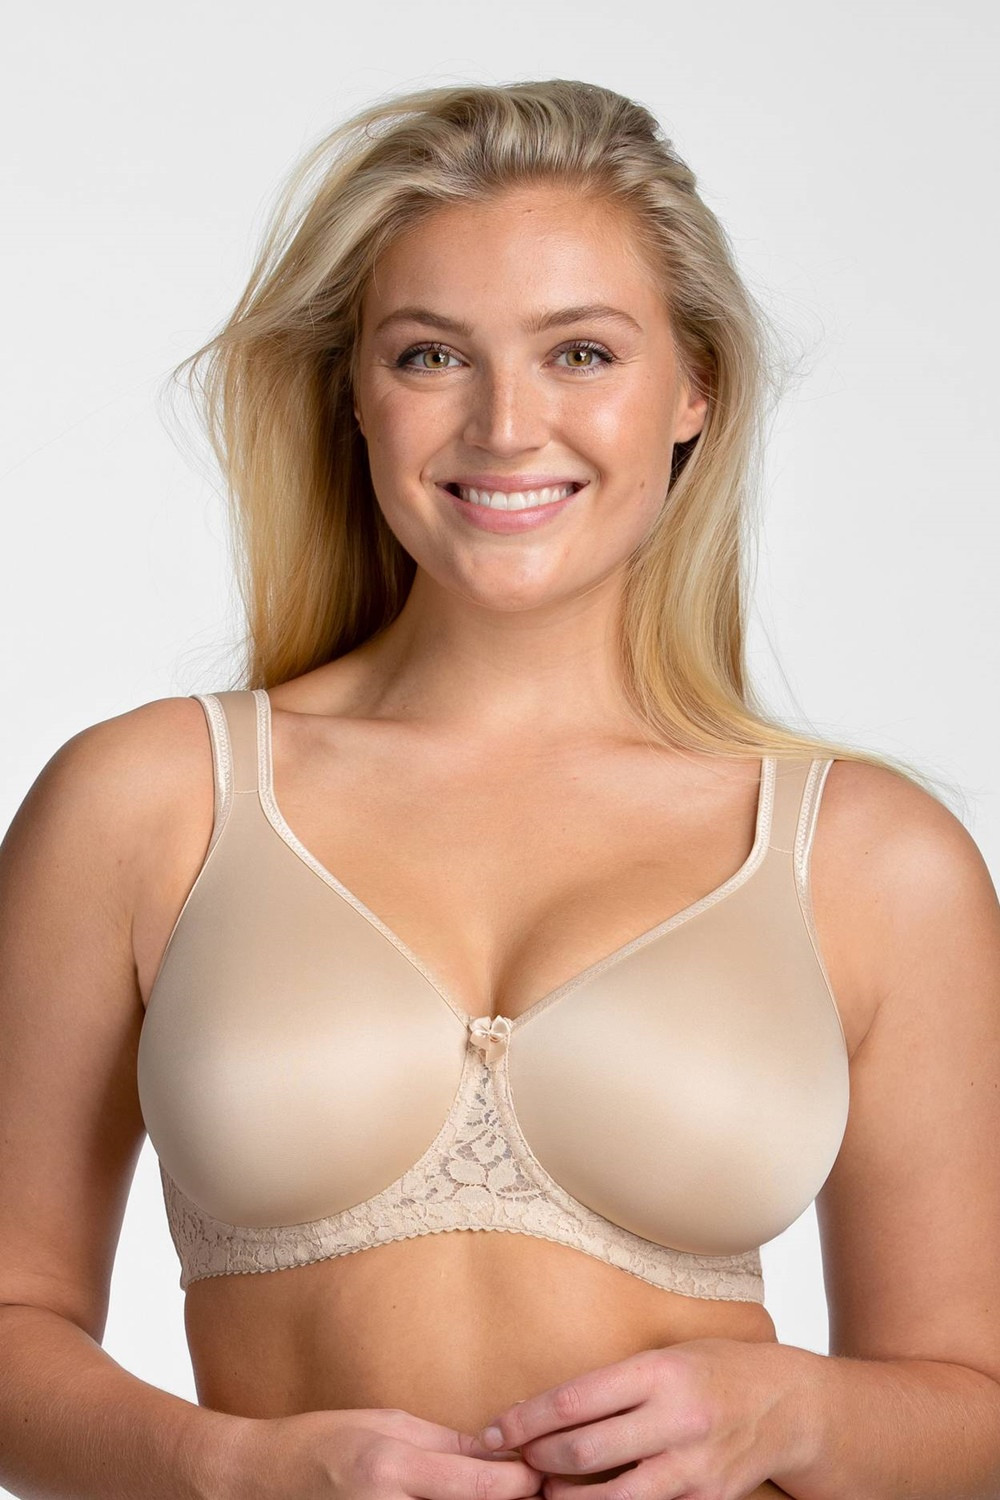 Underwired bra with elastic lace for heavy breasts